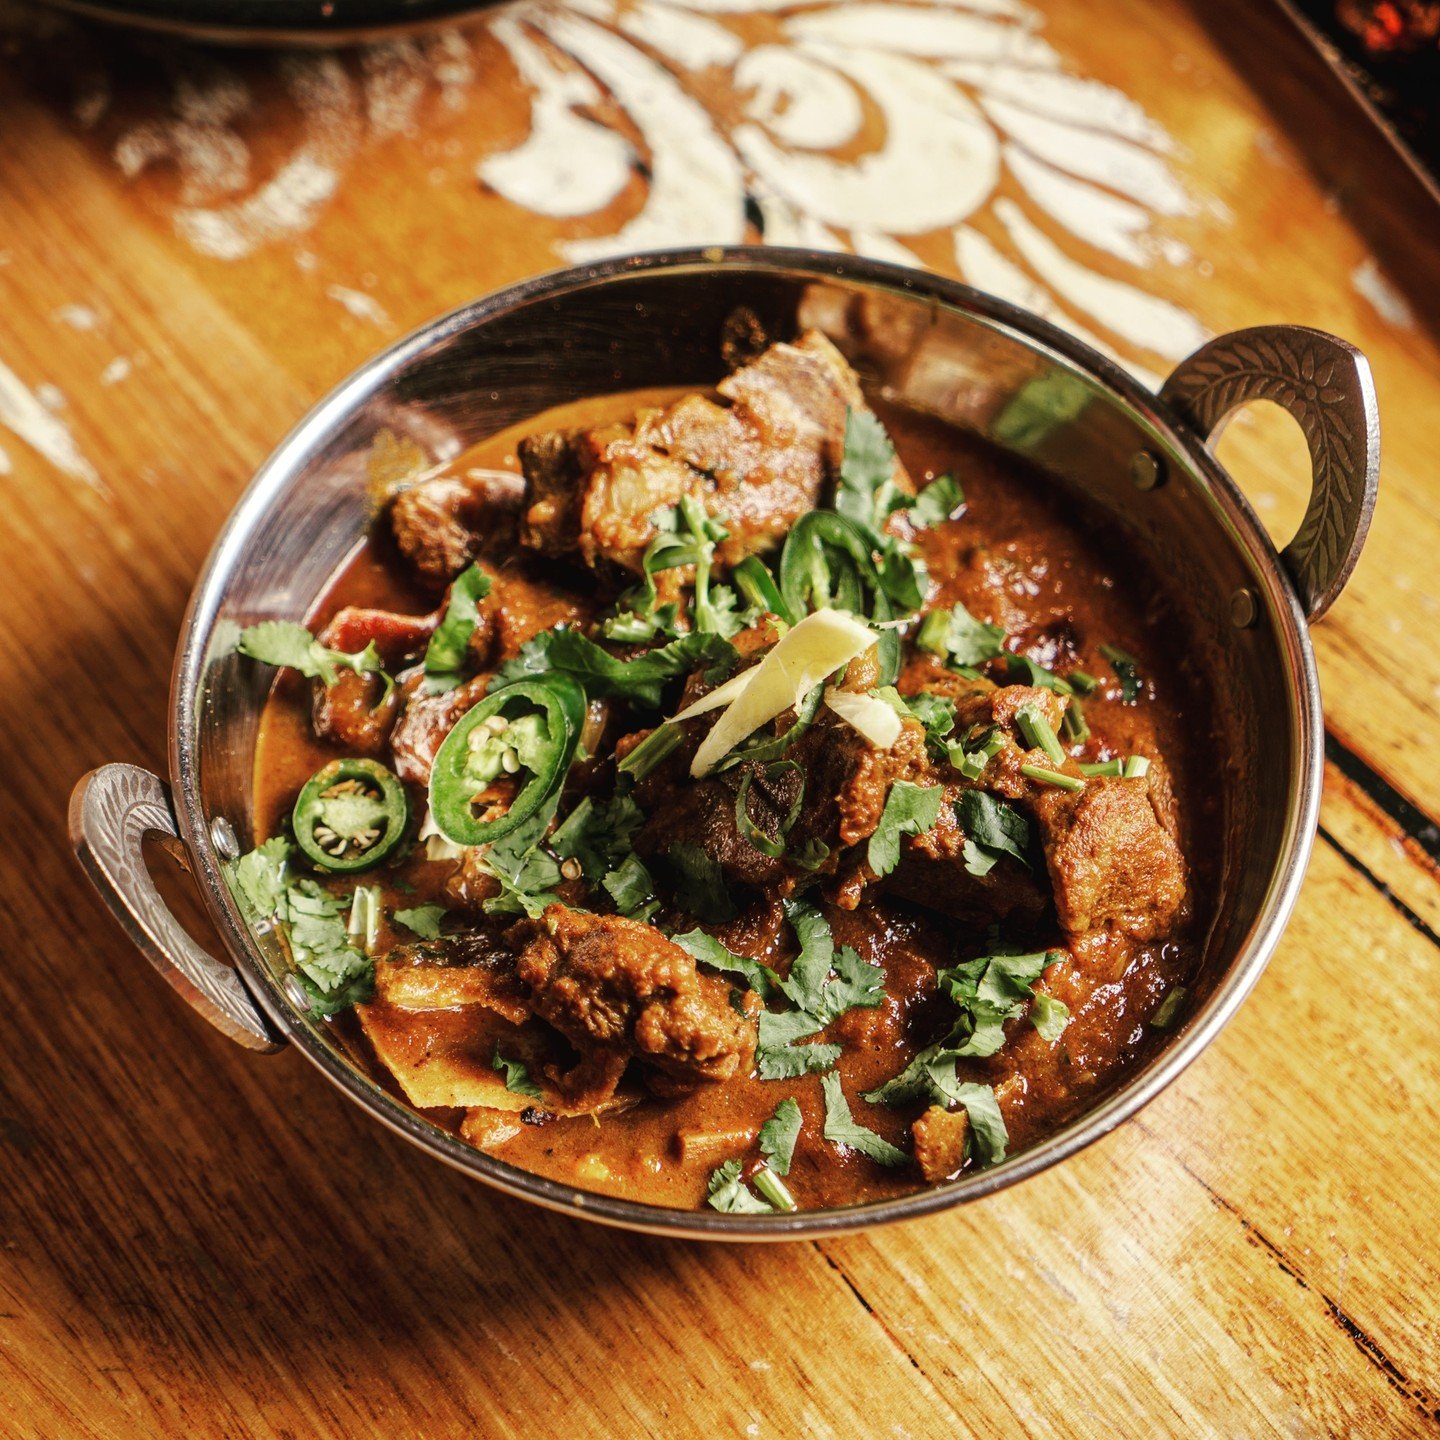 Eid Mubarak....
Slow Cooked Goat Curry
We cook Goat like its Eid Al Adha everyday. Slow cooked for long hors to ensure that meat falls of the bone.